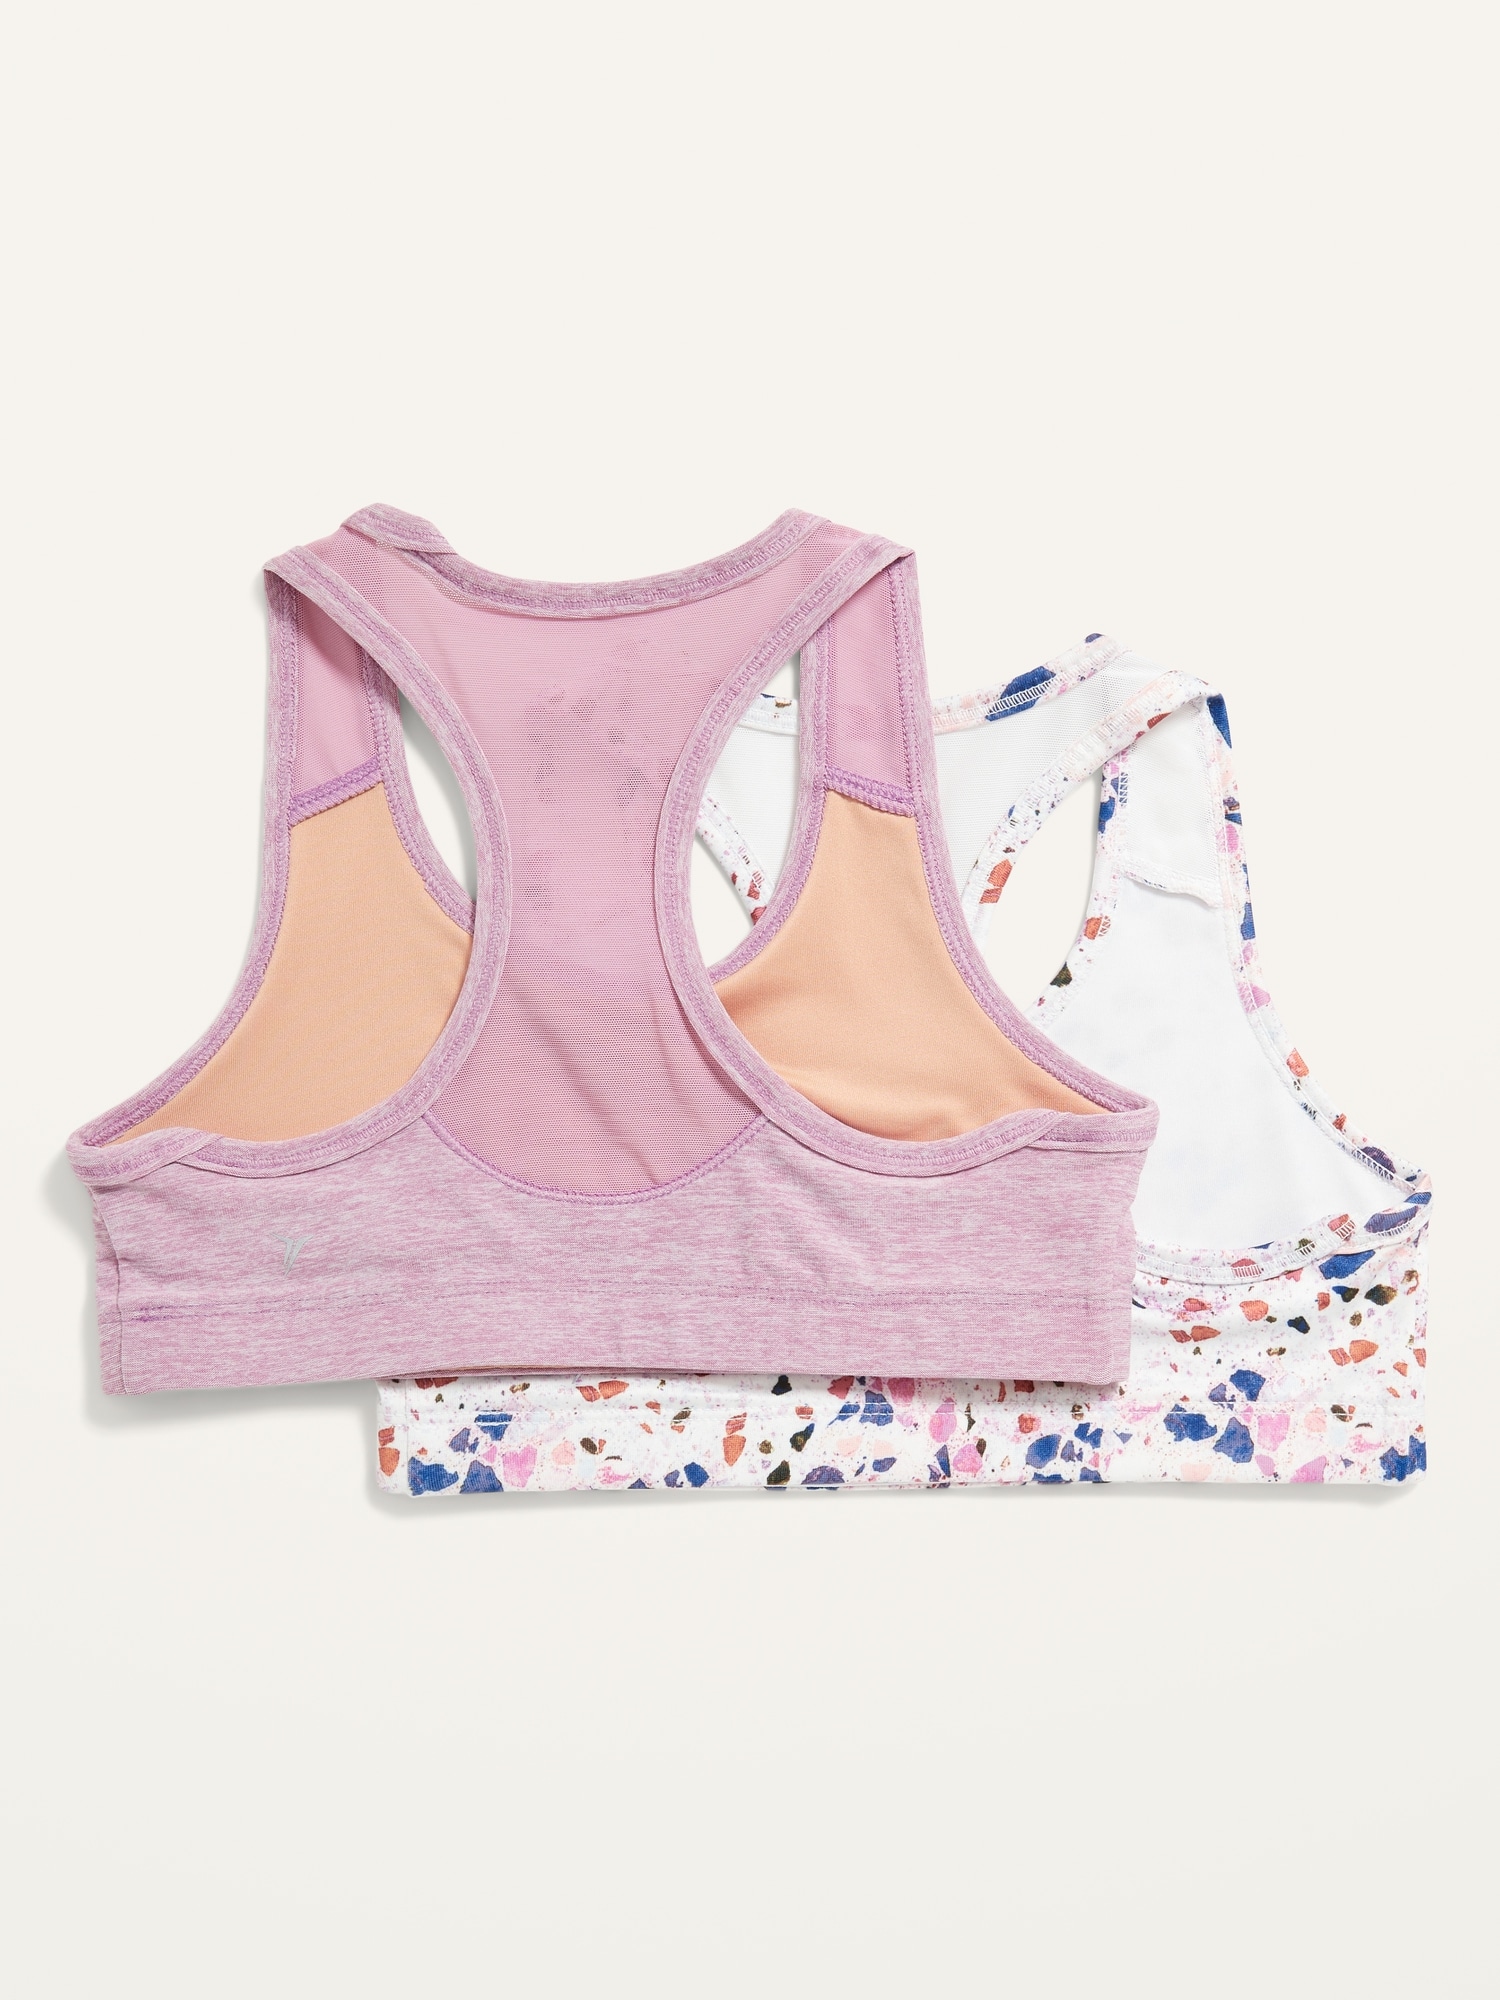 Old Navy - Go-Dry Double-Strappy PowerPress Sports Bra 2-Pack for Girls